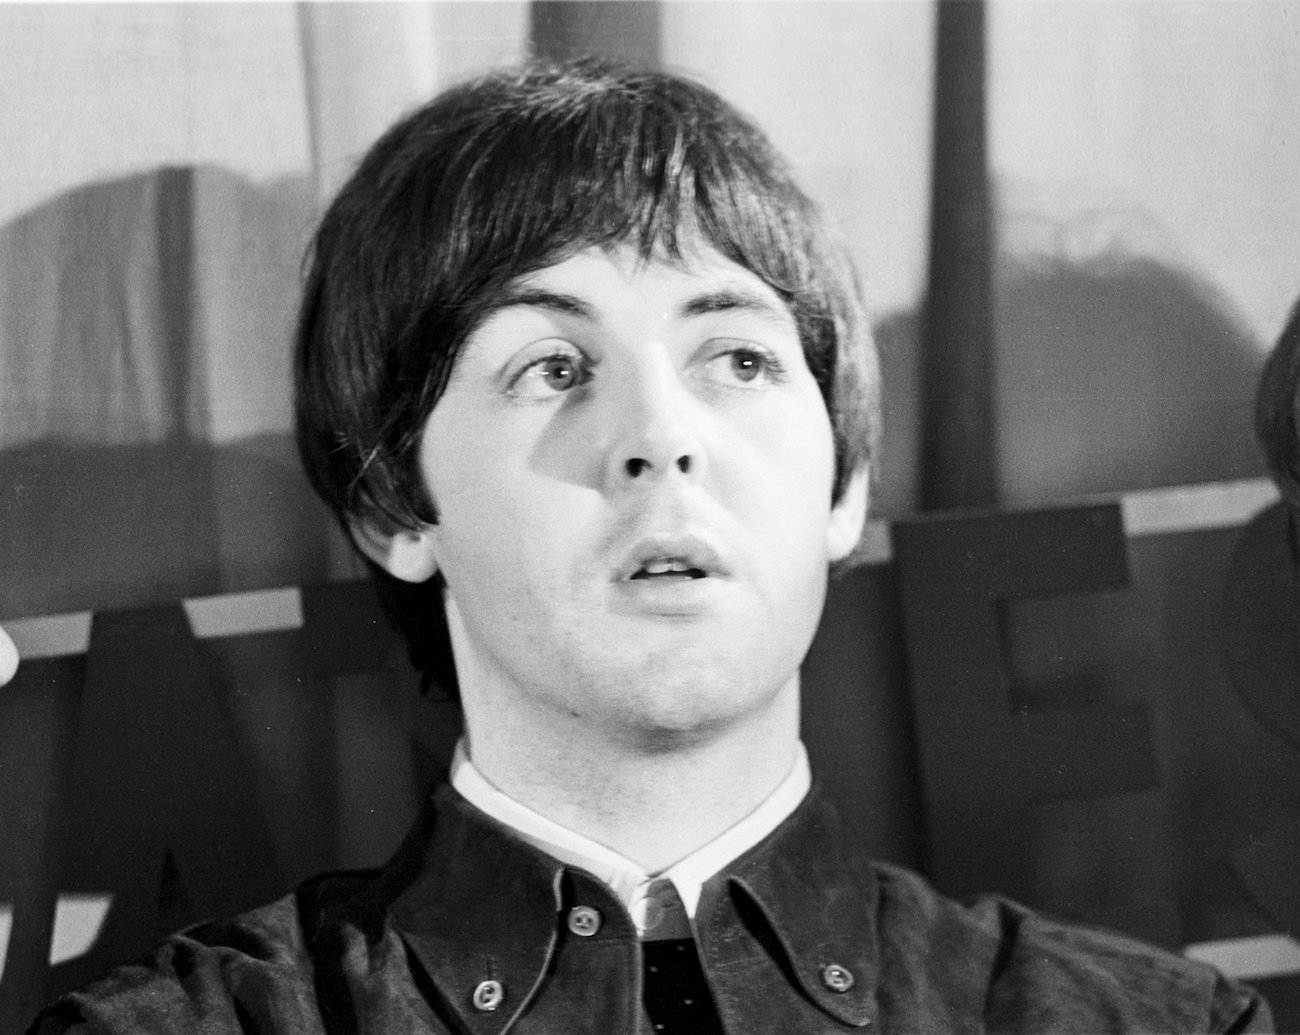 Paul McCartney in Germany with The Beatles in 1966.